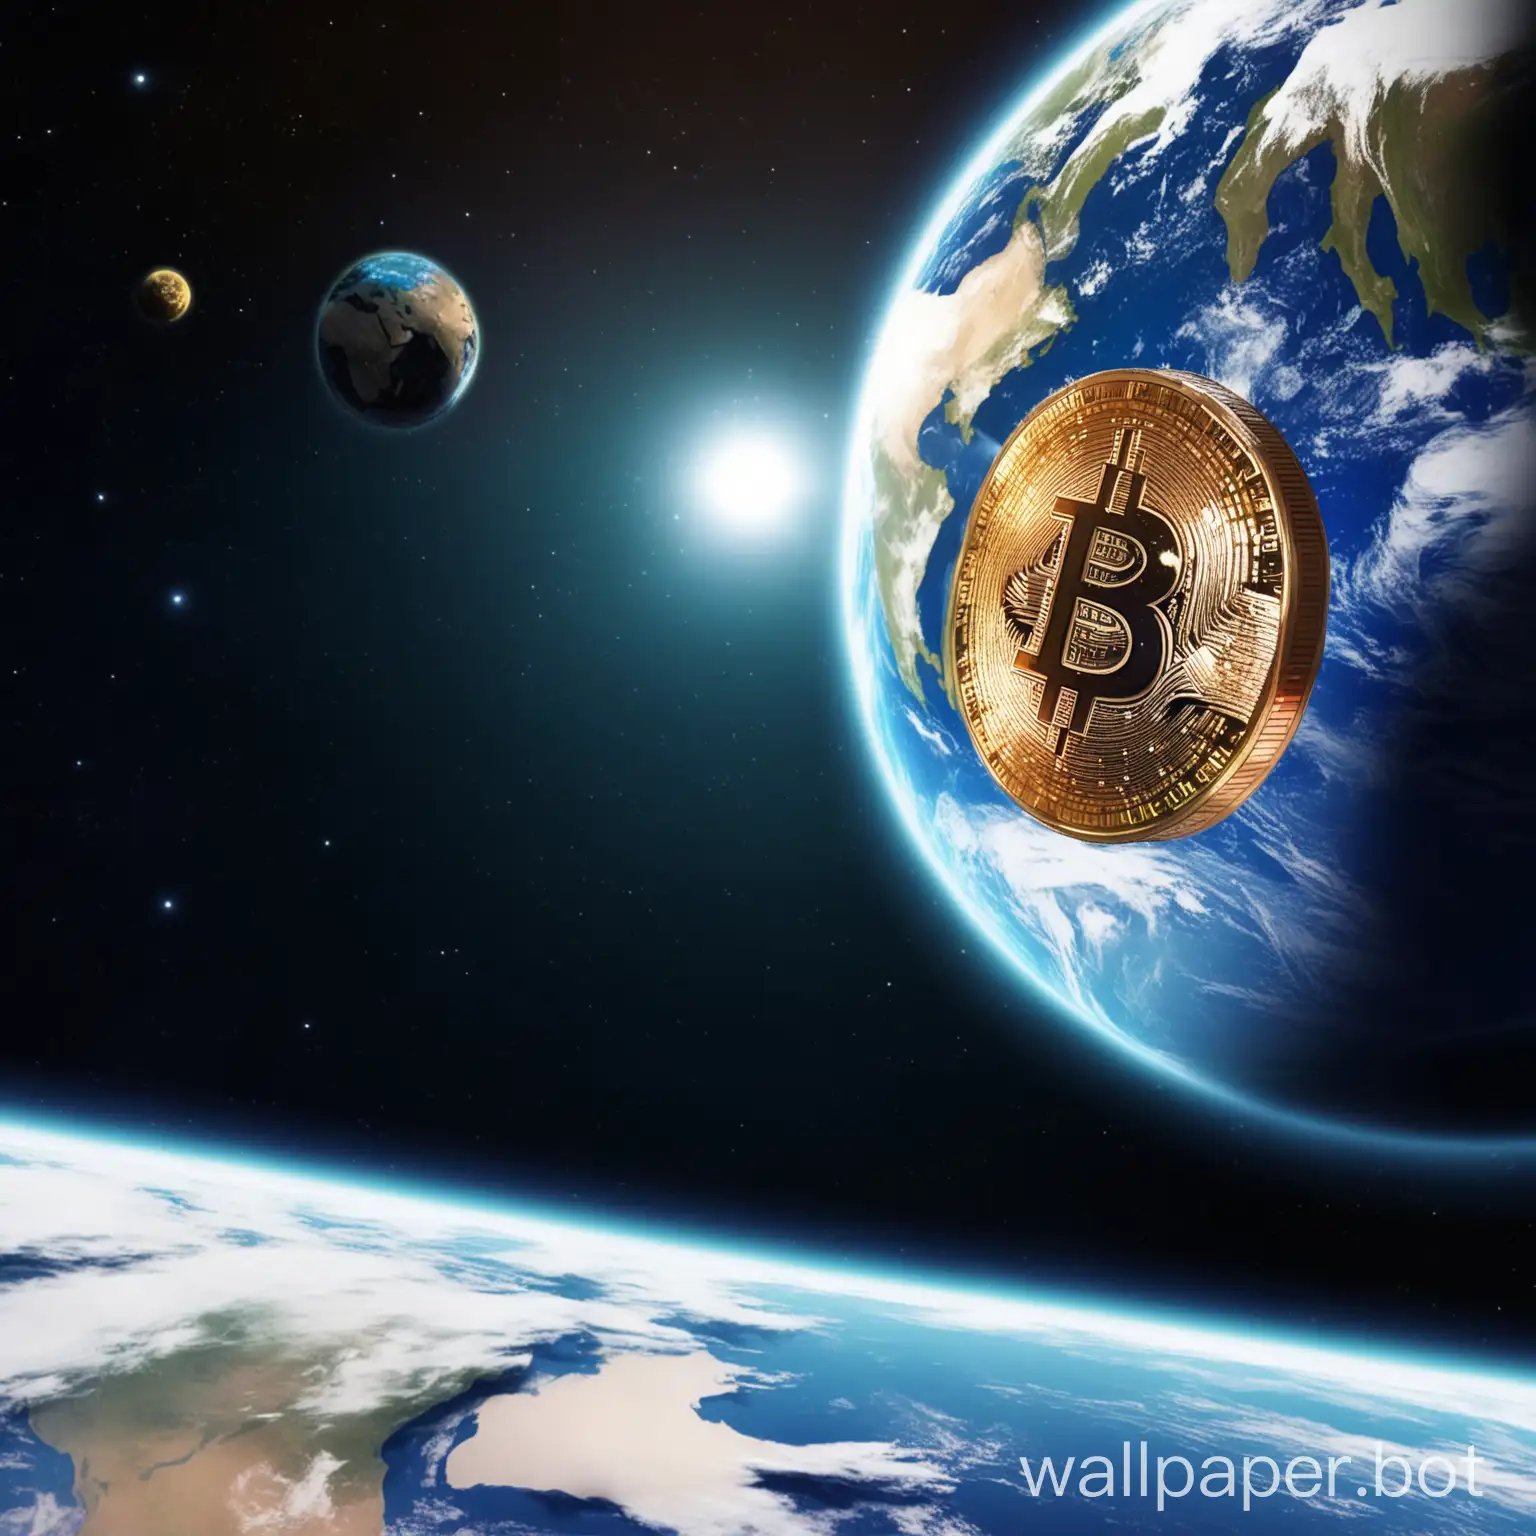 Bitcoin appears behind Planet earth